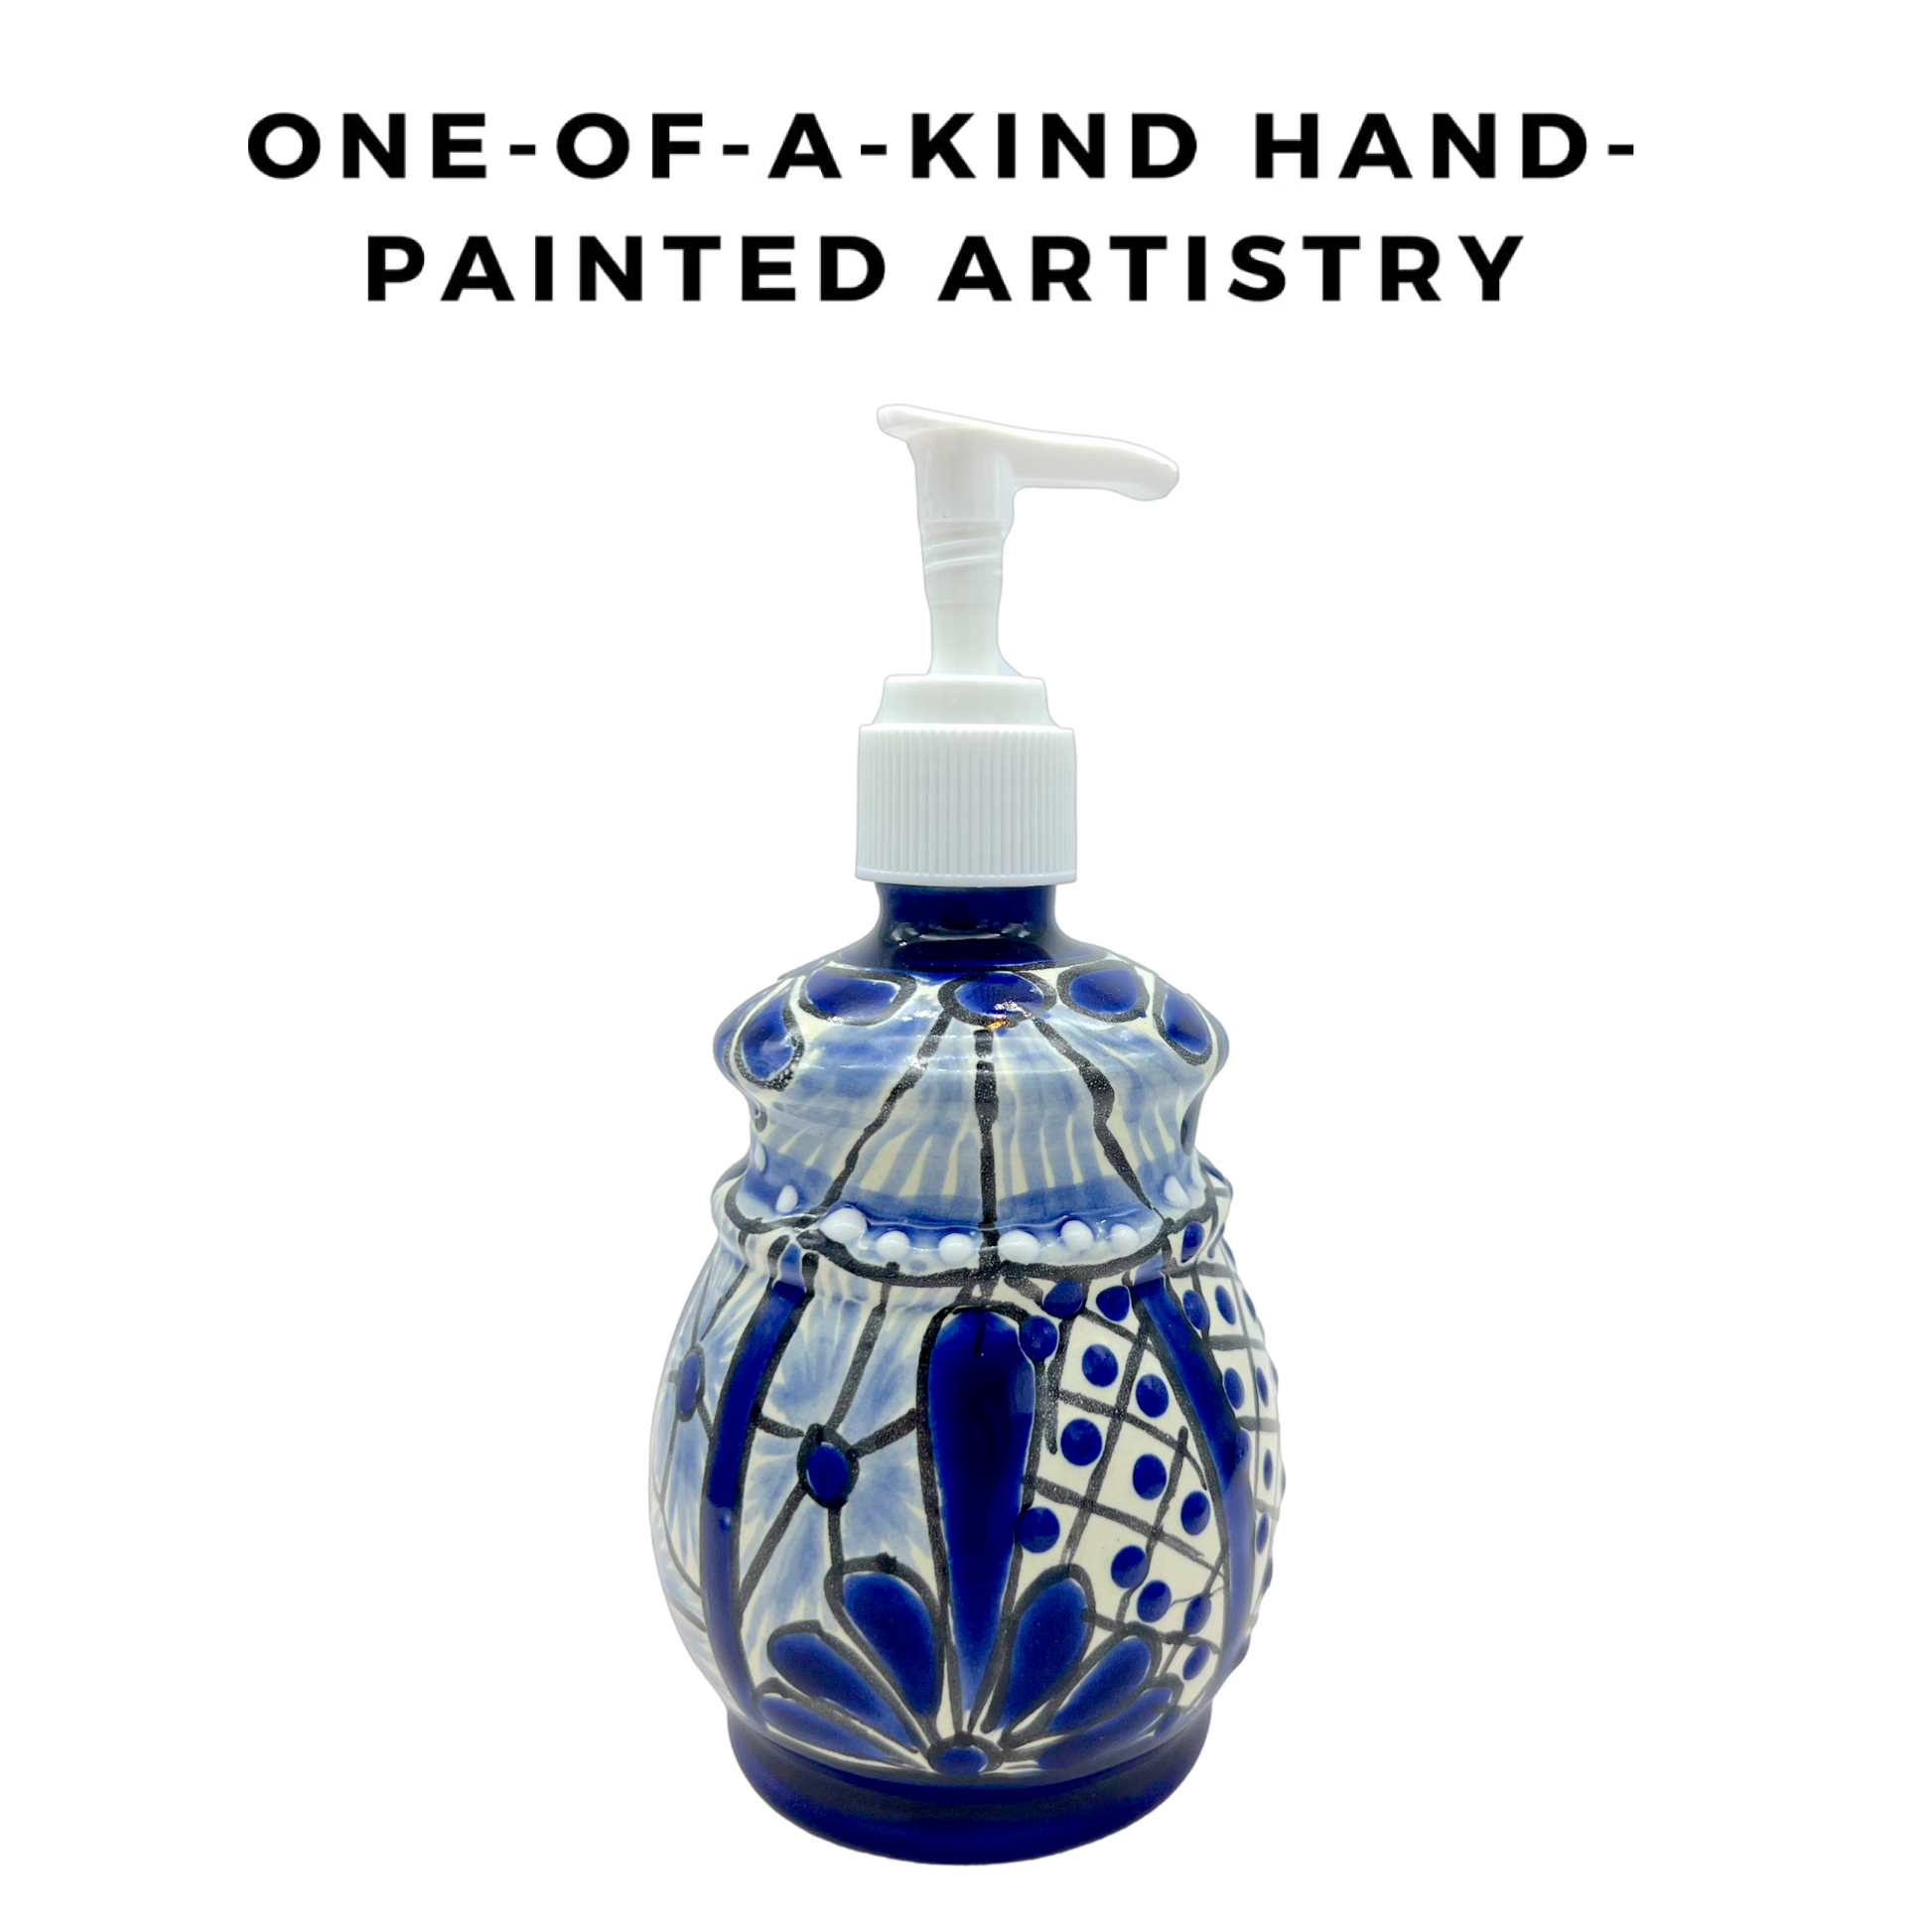 Hand-painted Talavera Ceramic Soap Dispenser in blue and white, a unique addition to kitchen or bathroom decor. one of a kind